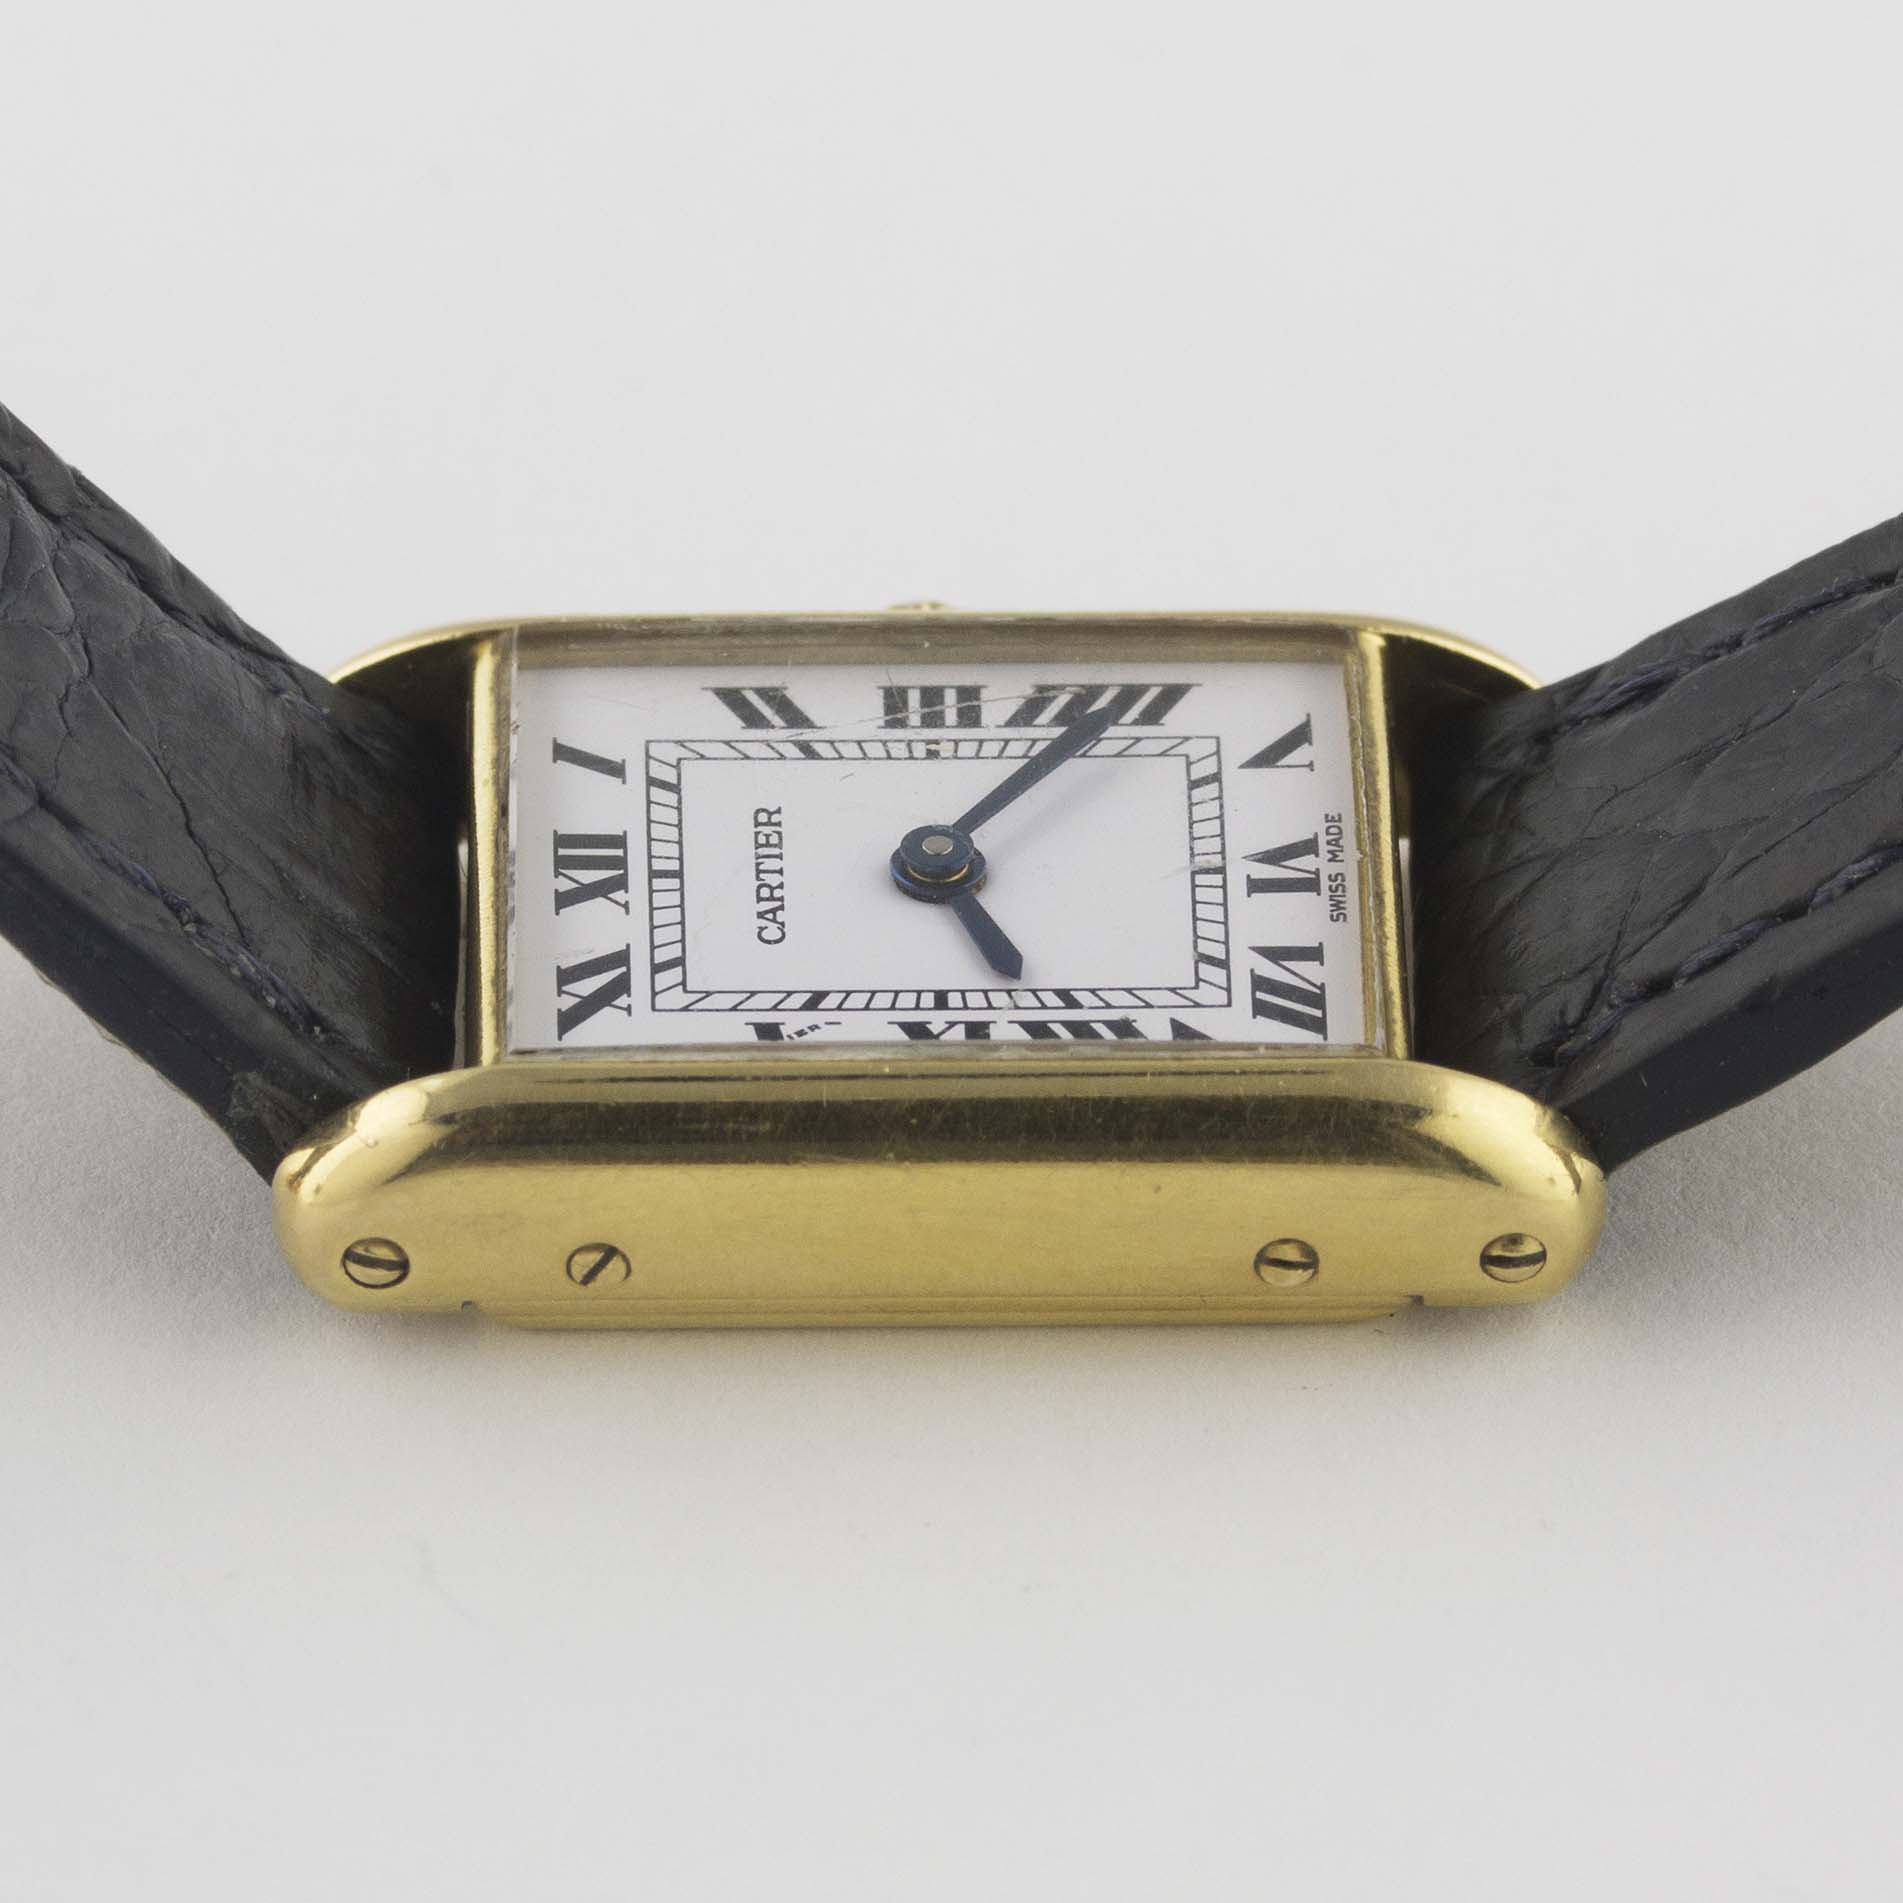 A LADIES 18K SOLID GOLD CARTIER TANK WRIST WATCH CIRCA 1980s Movement: Manual wind, signed - Image 11 of 12